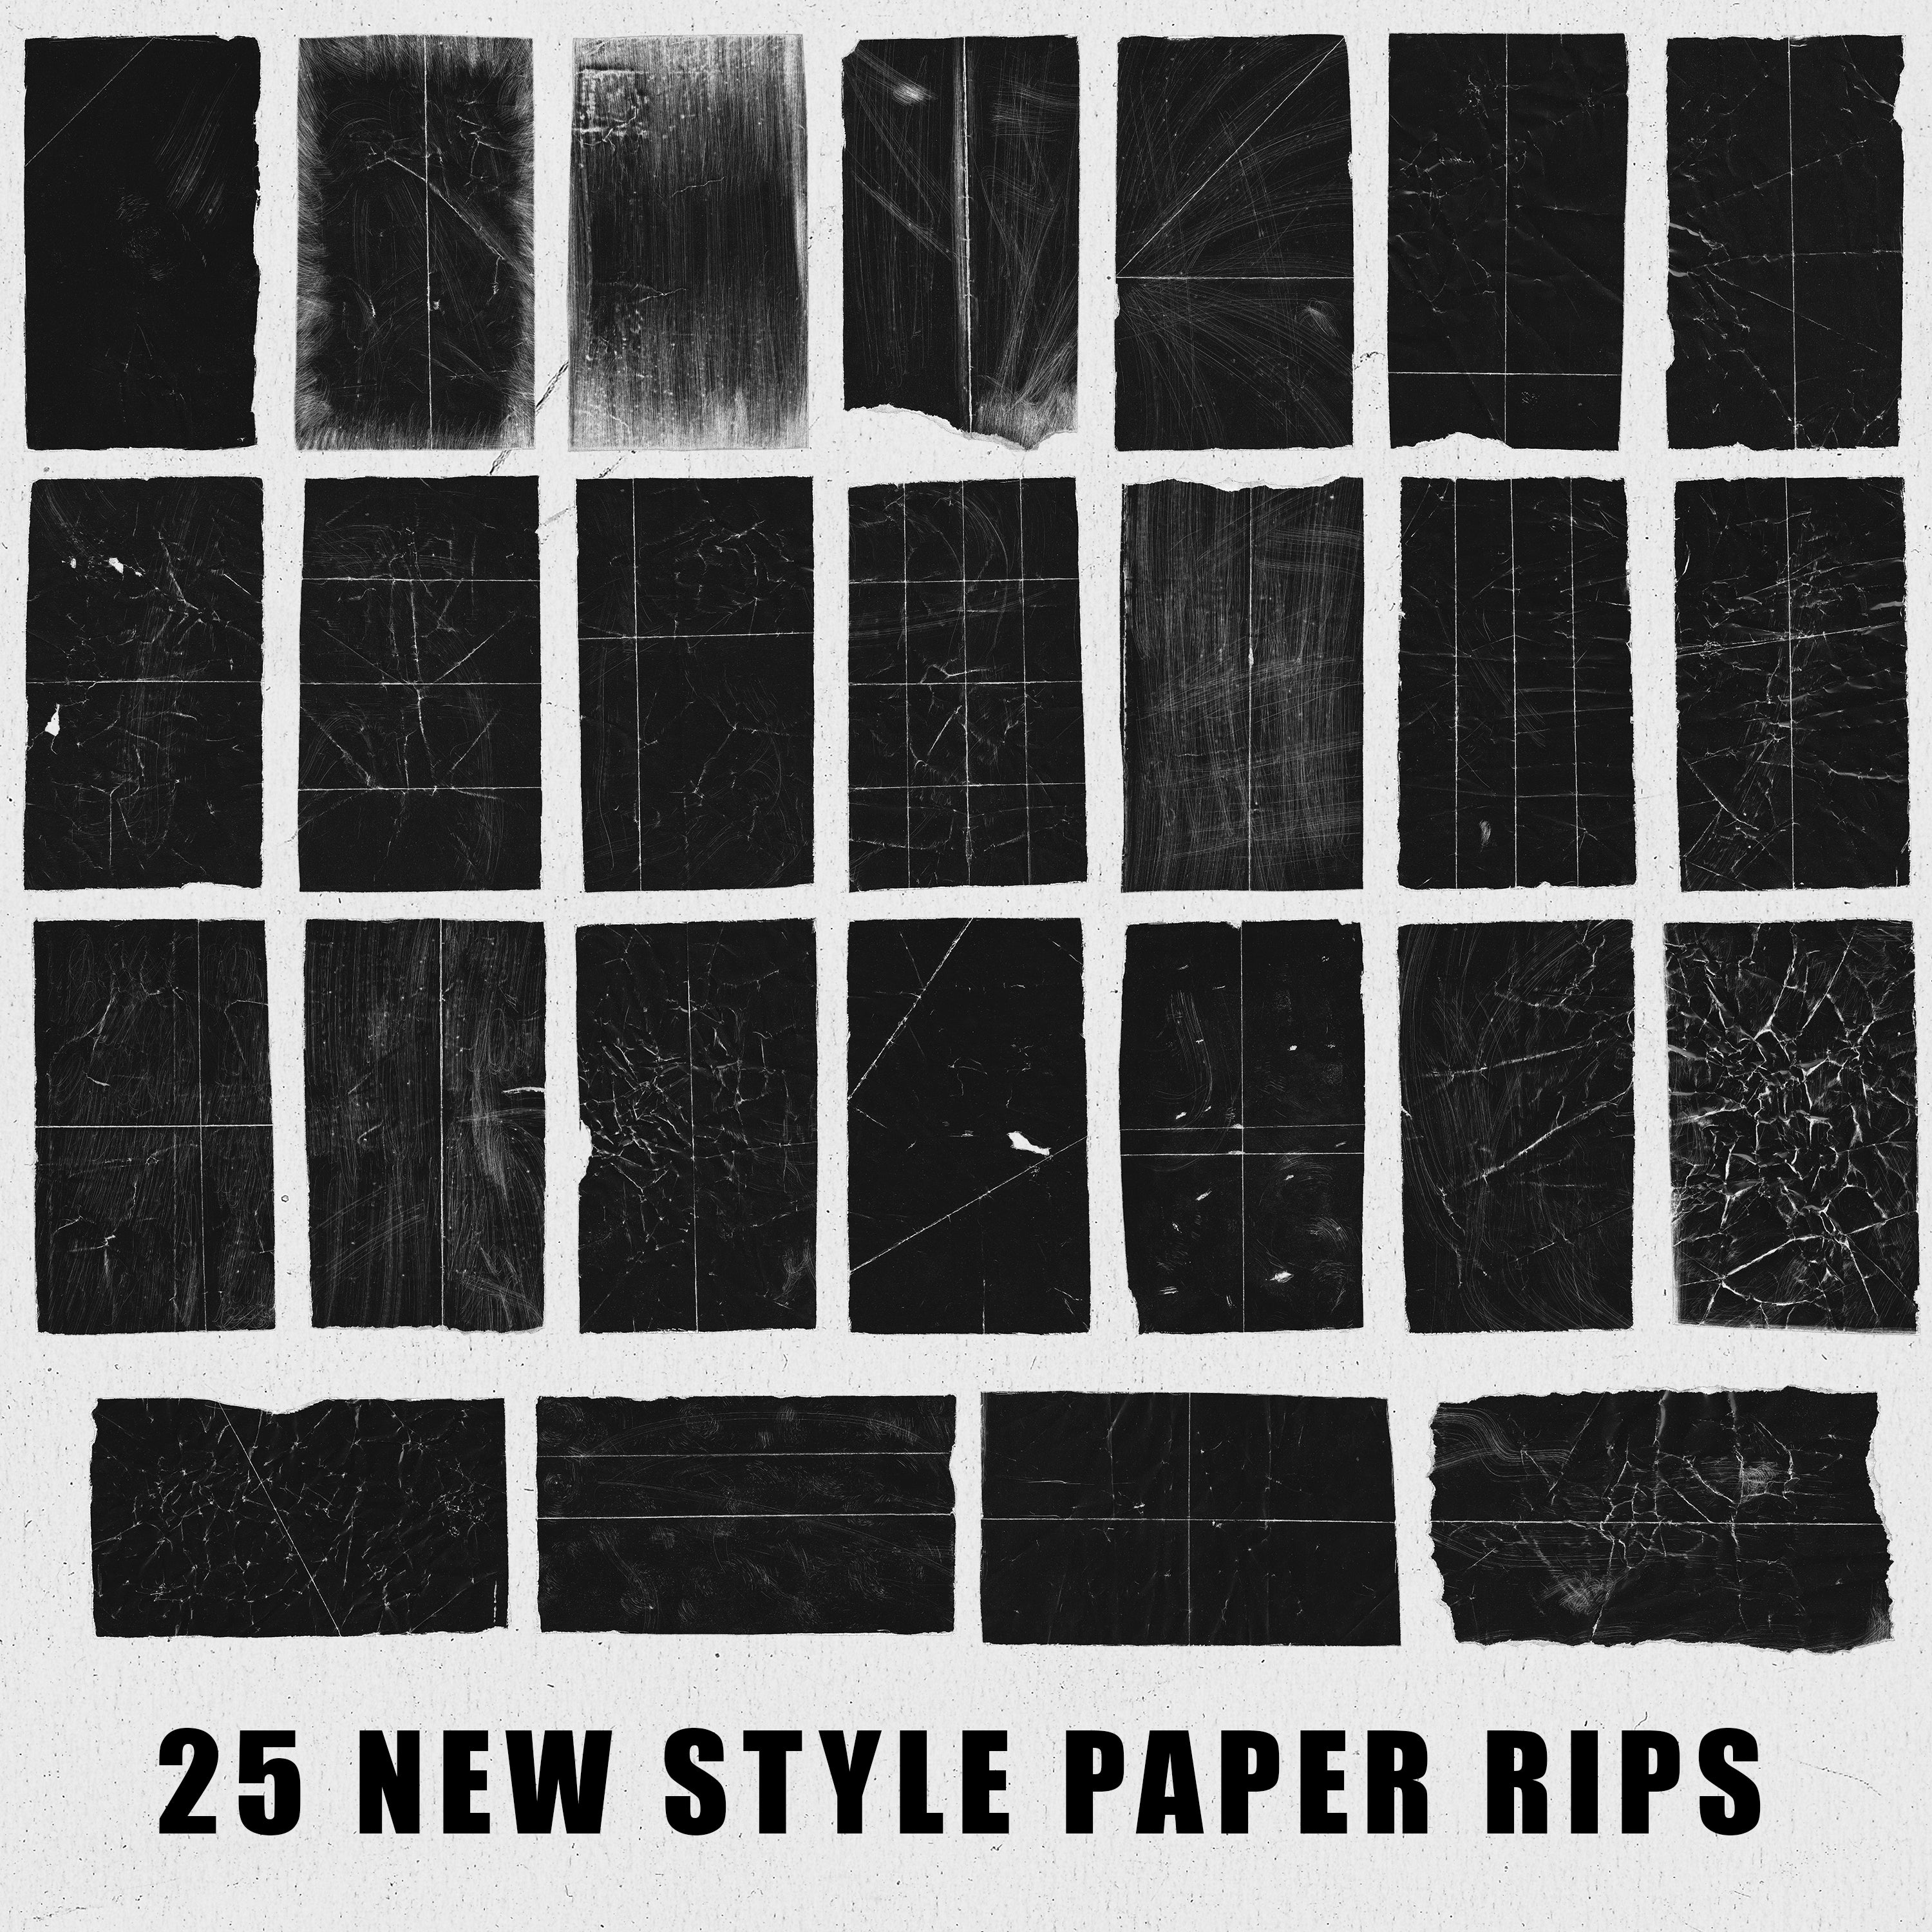 PAPER RIPS AND FOLDS V2